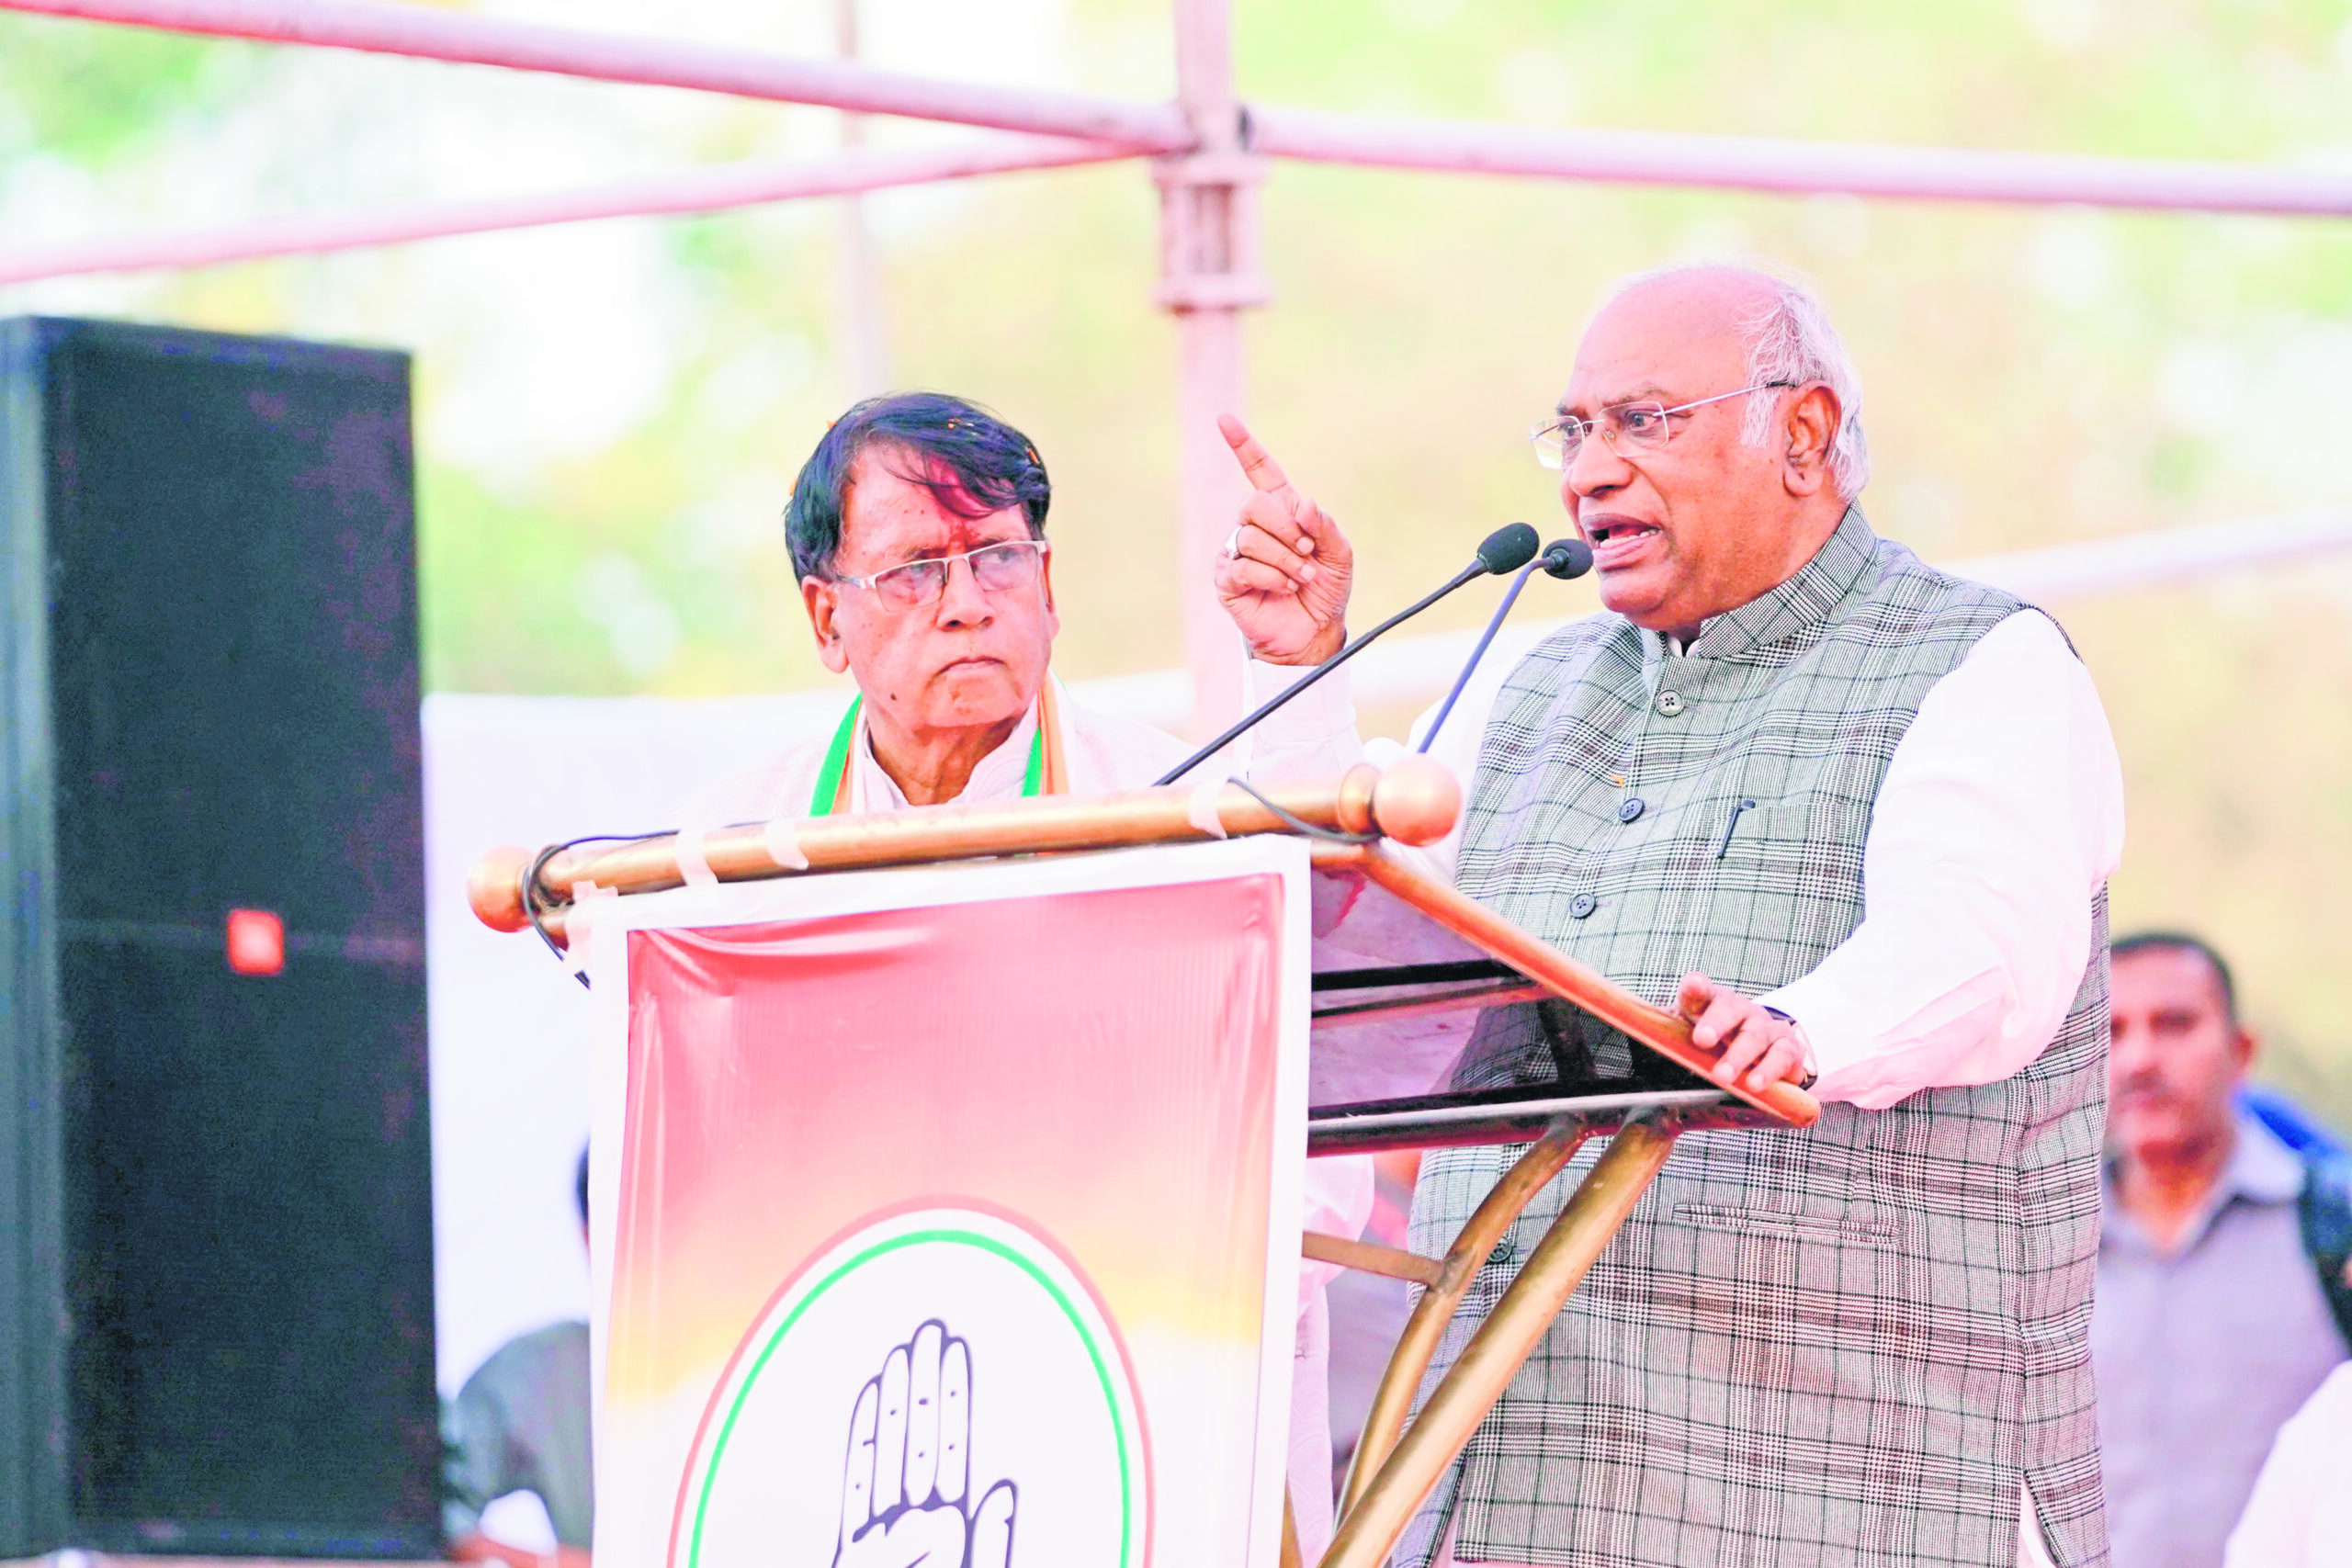 Focus on official duties, don’t roam like an MLA: Kharge to PM